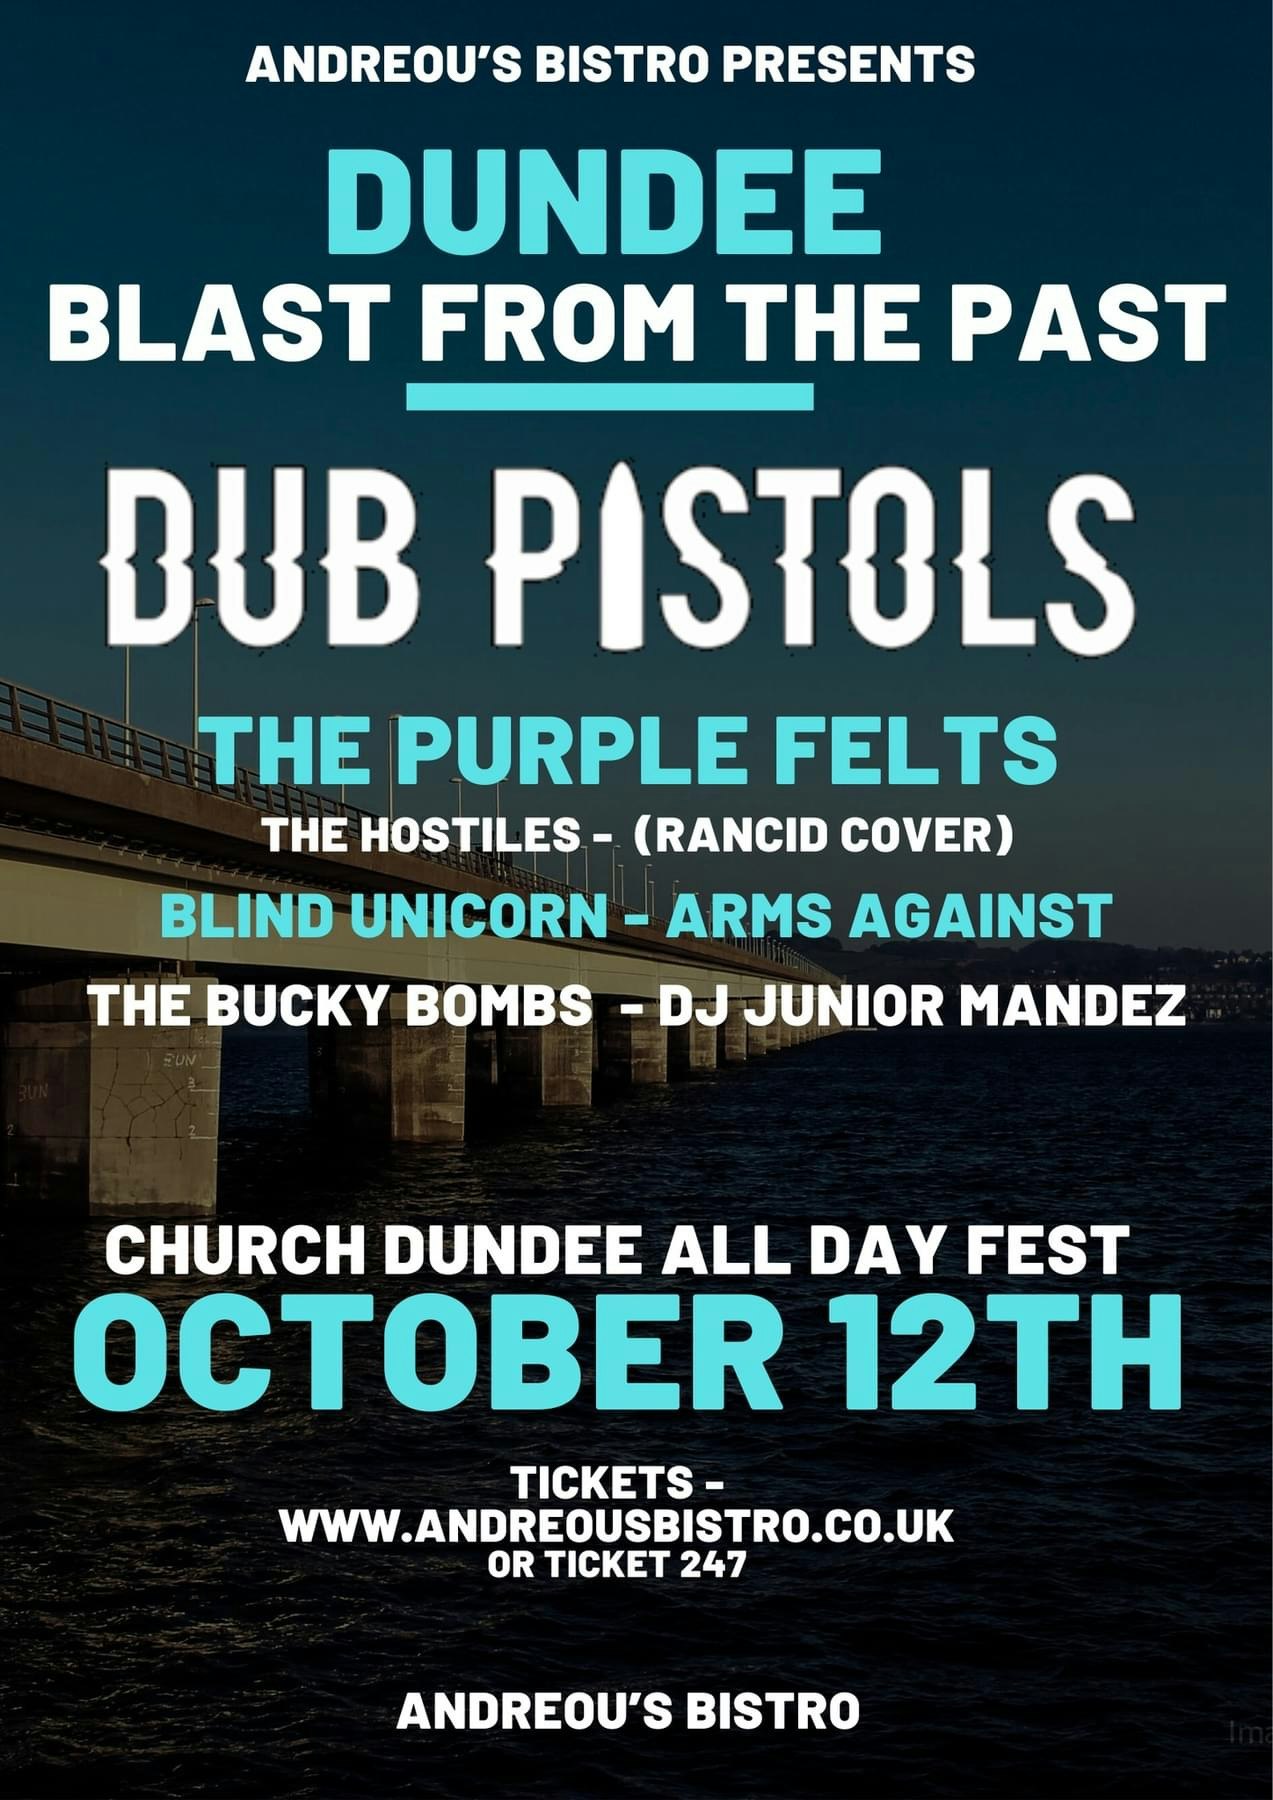 Dundee Blast From the Past Ft Dub Pistols Live